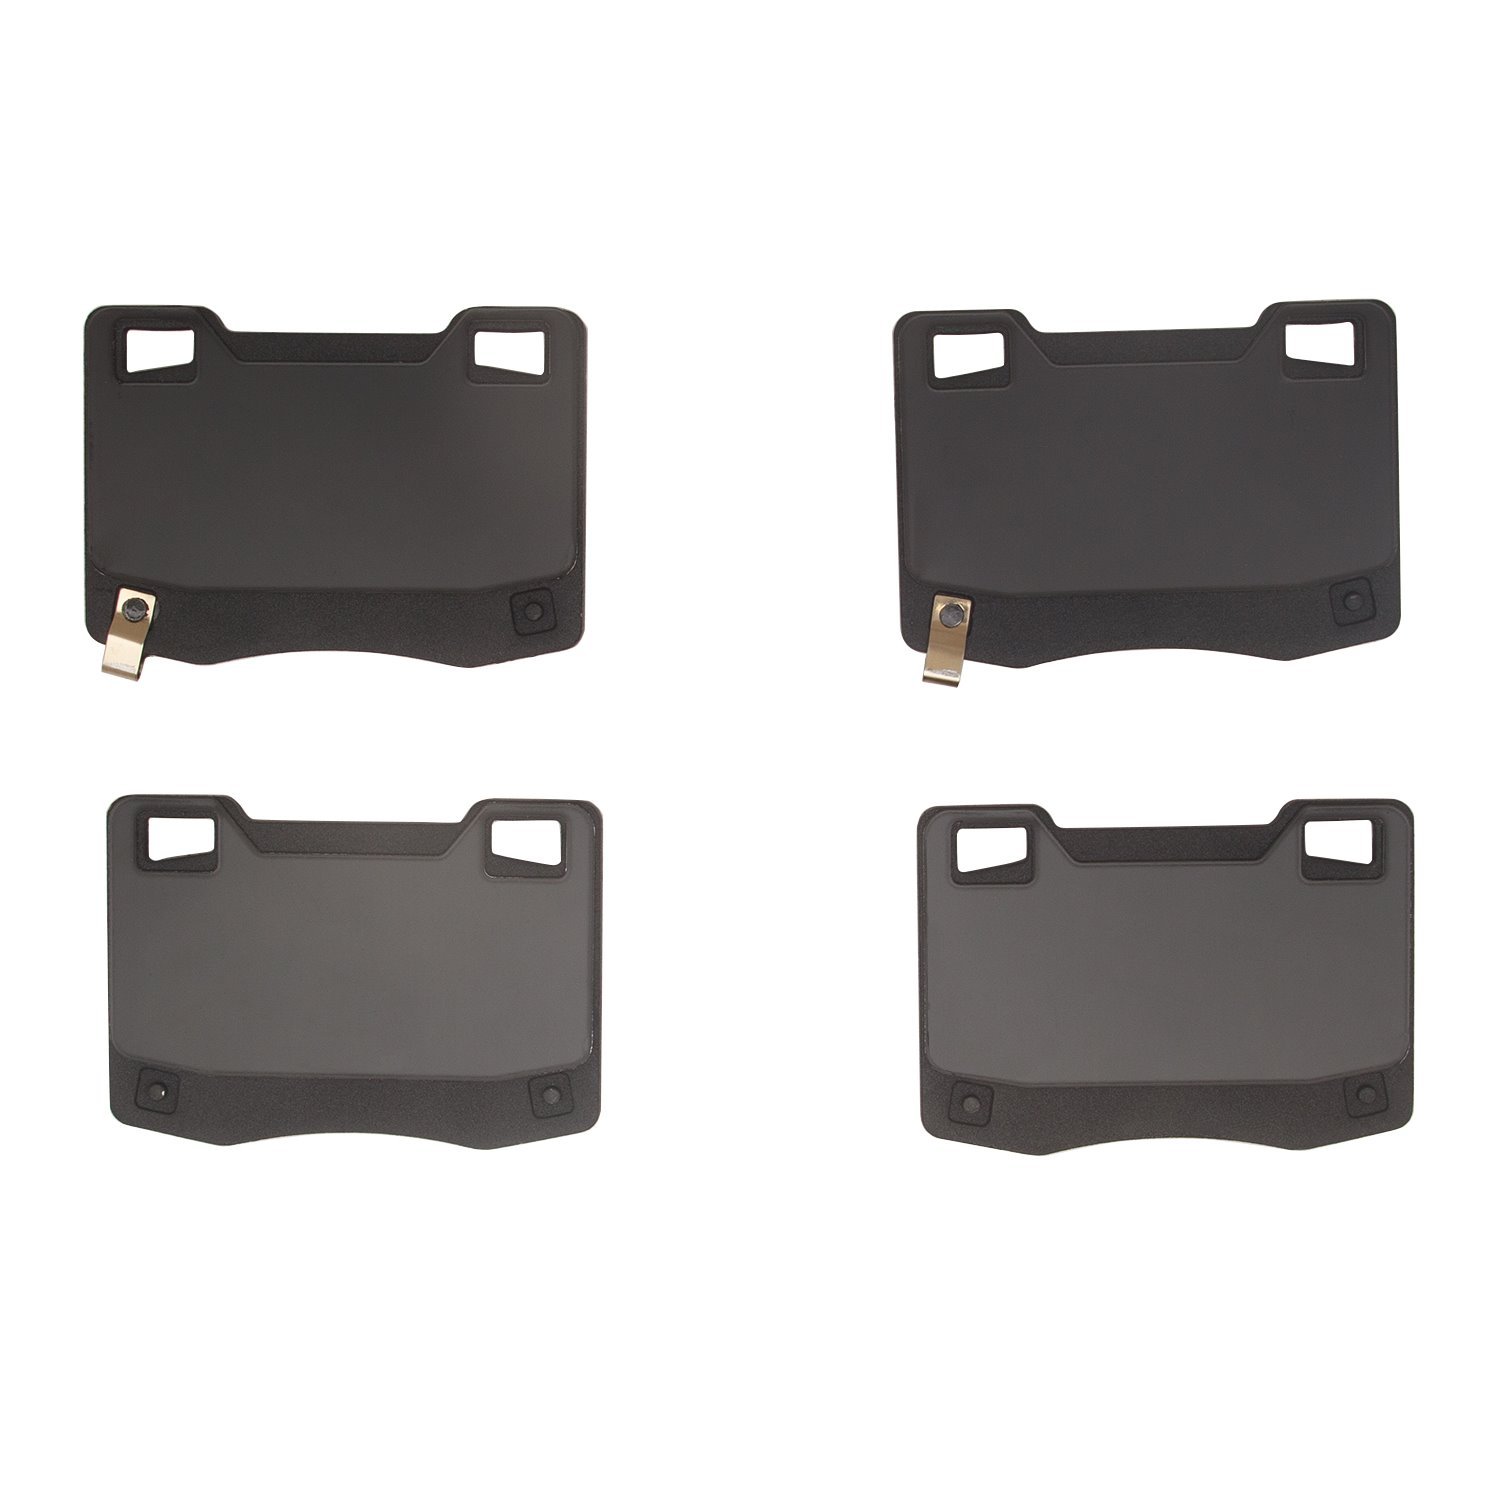 1551-2363-00 5000 Advanced Low-Metallic Brake Pads, Fits Select Ford/Lincoln/Mercury/Mazda, Position: Rear